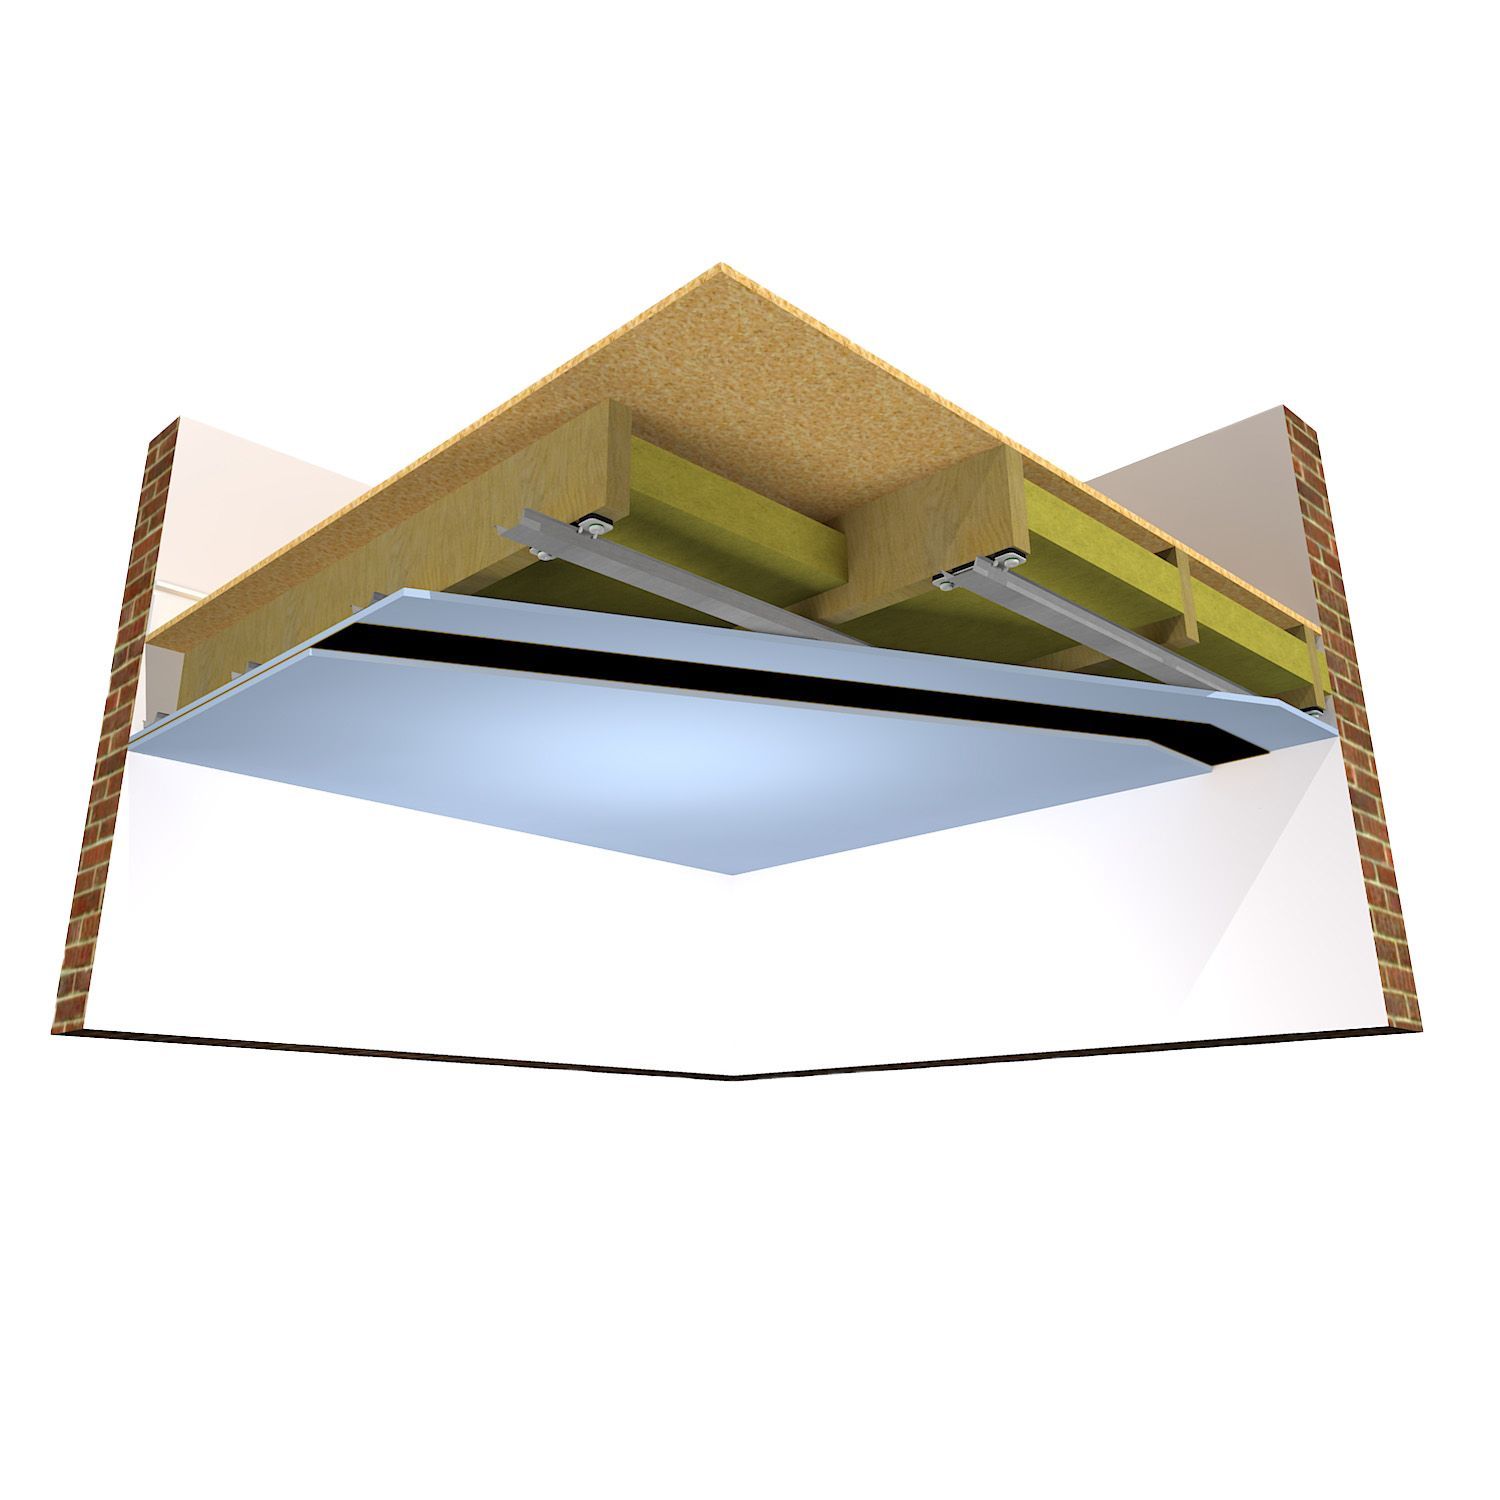 ReductoClip Timber Joist Ceiling